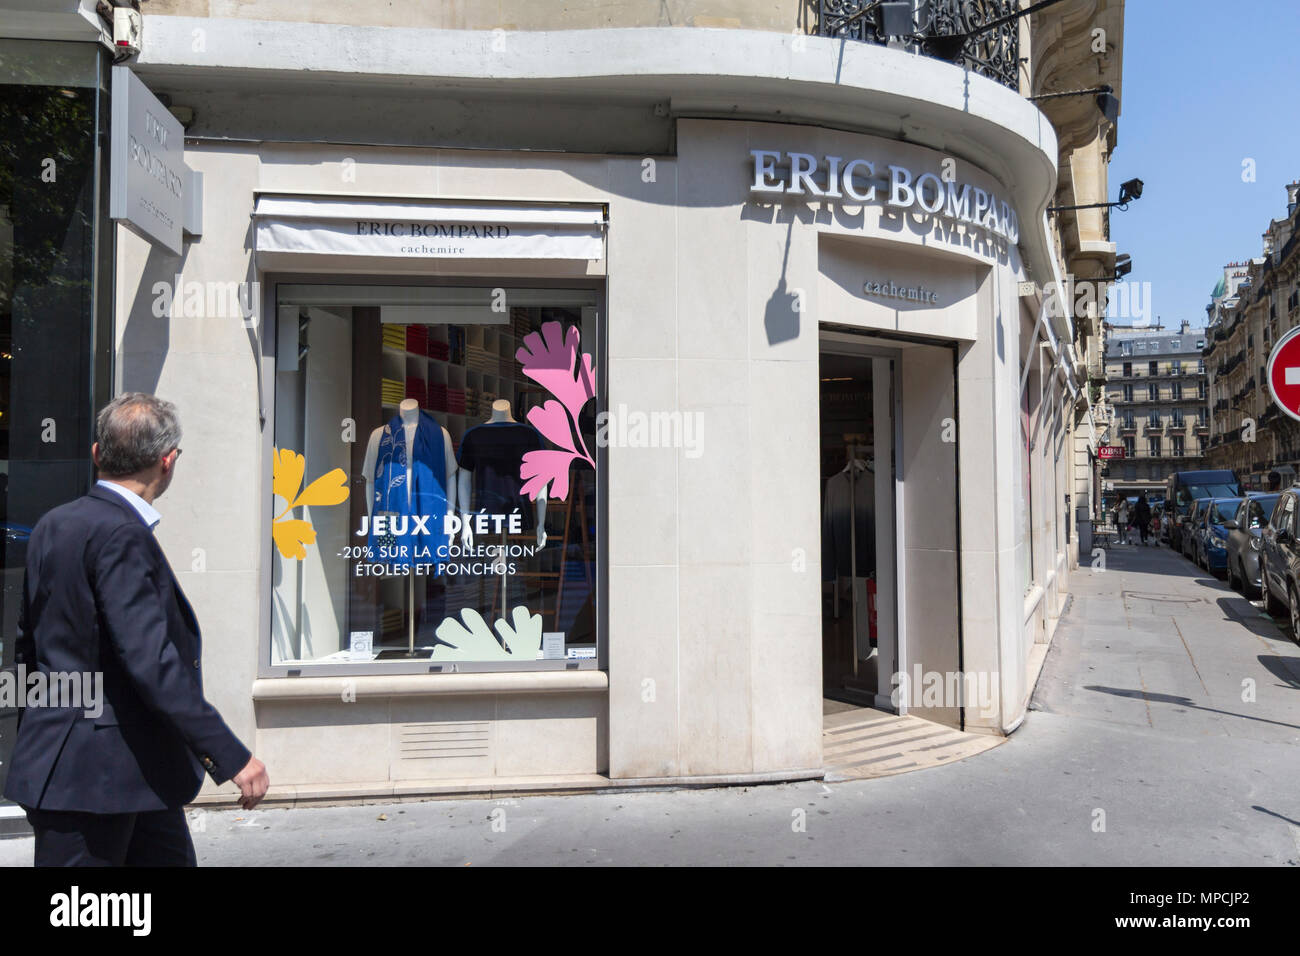 Erci Bompard, french cashmere store in Paris, France Stock Photo - Alamy